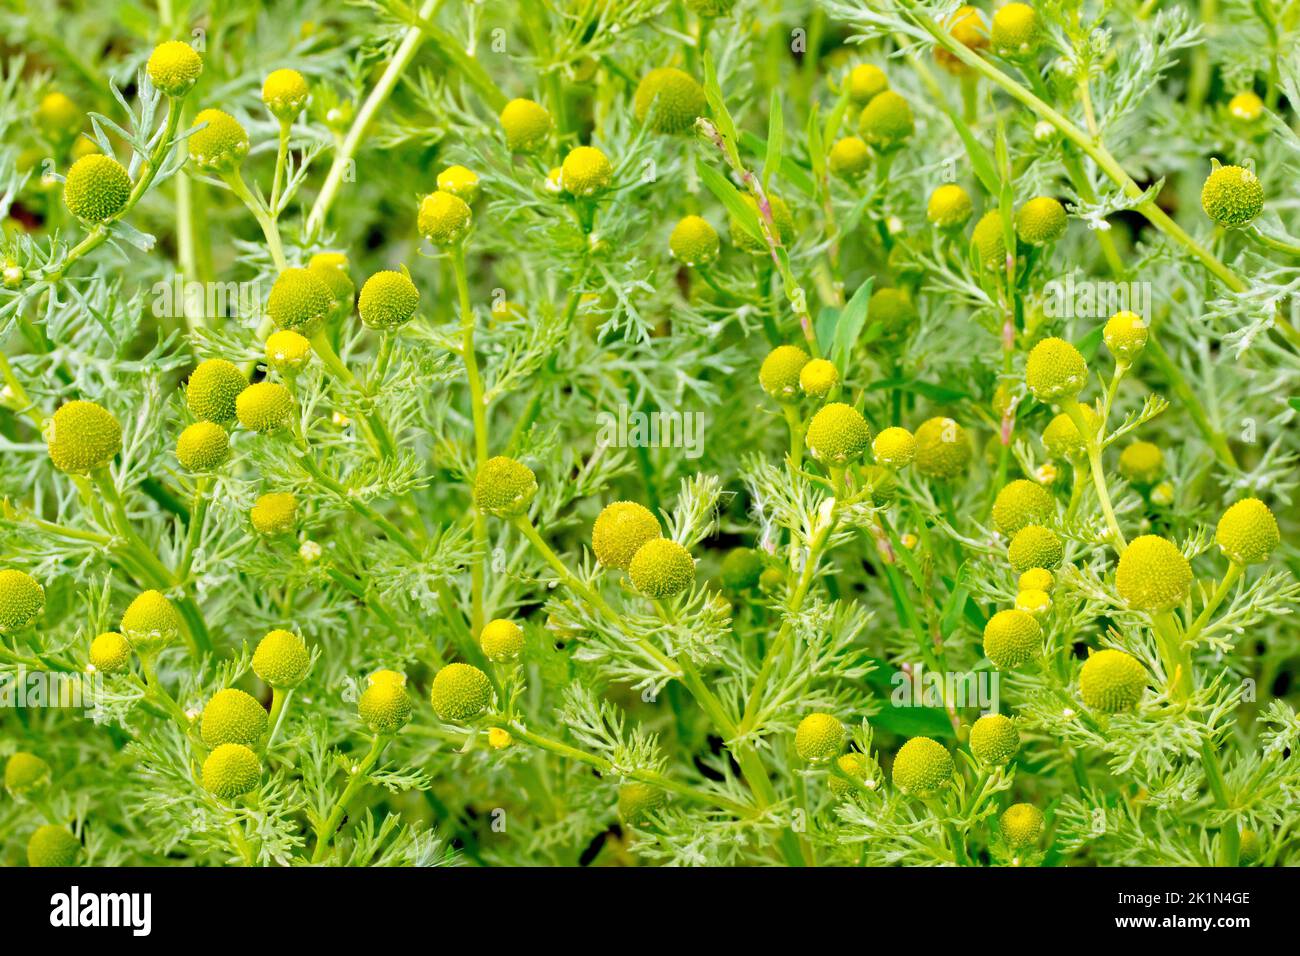 Pineappleweed or Pineapple Mayweed (matricaria matricarioides or chamomilla suaveolens), close up of a mass of the common weed of open places. Stock Photo